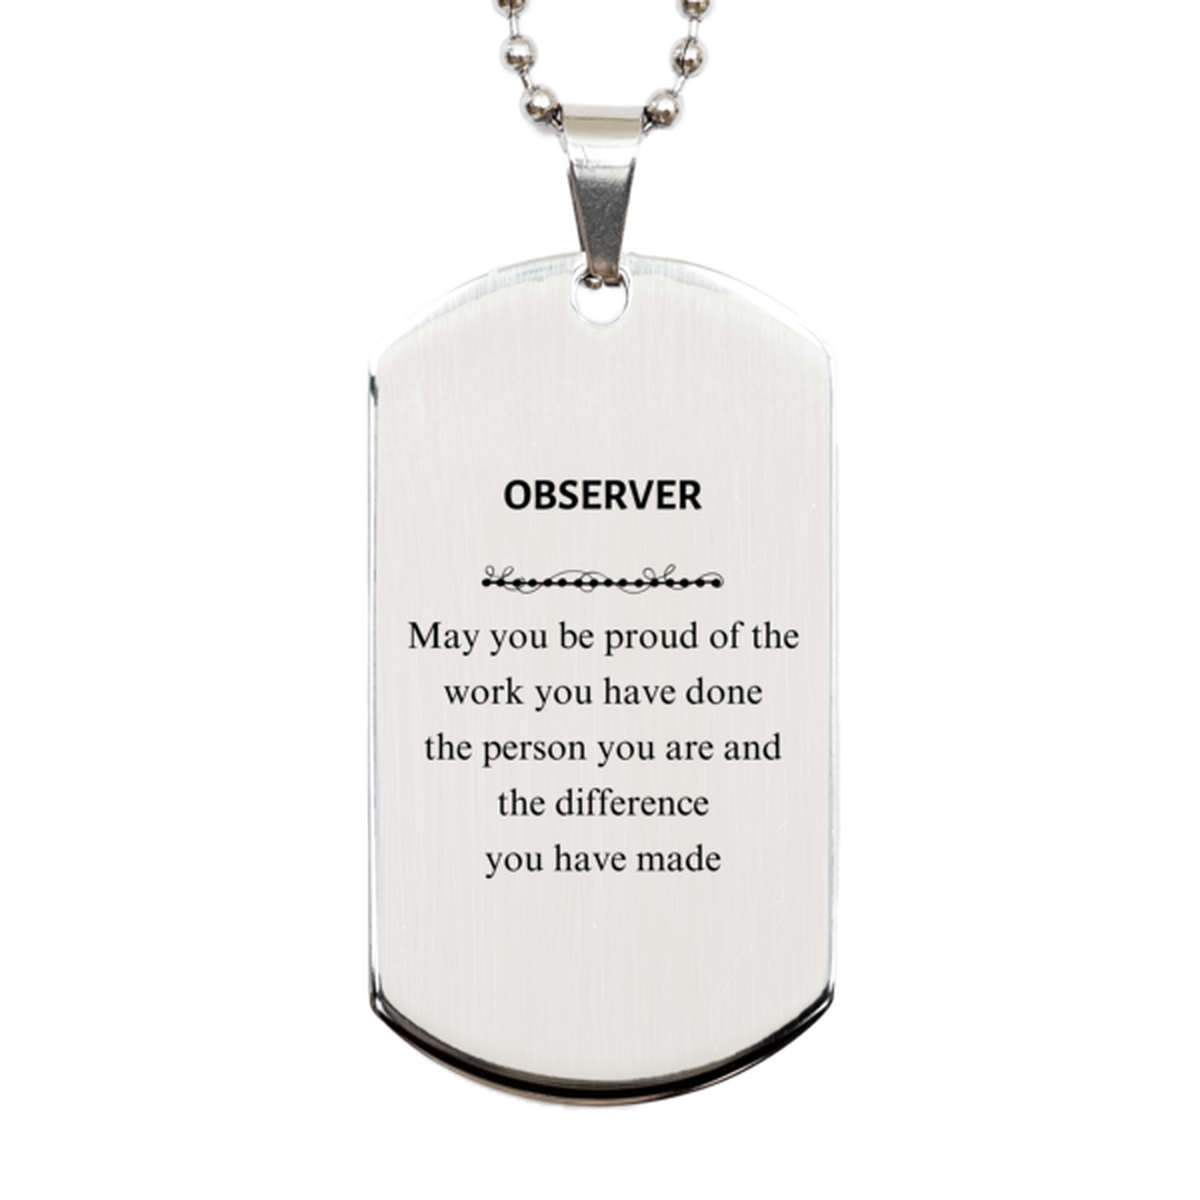 Observer May you be proud of the work you have done, Retirement Observer Silver Dog Tag for Colleague Appreciation Gifts Amazing for Observer